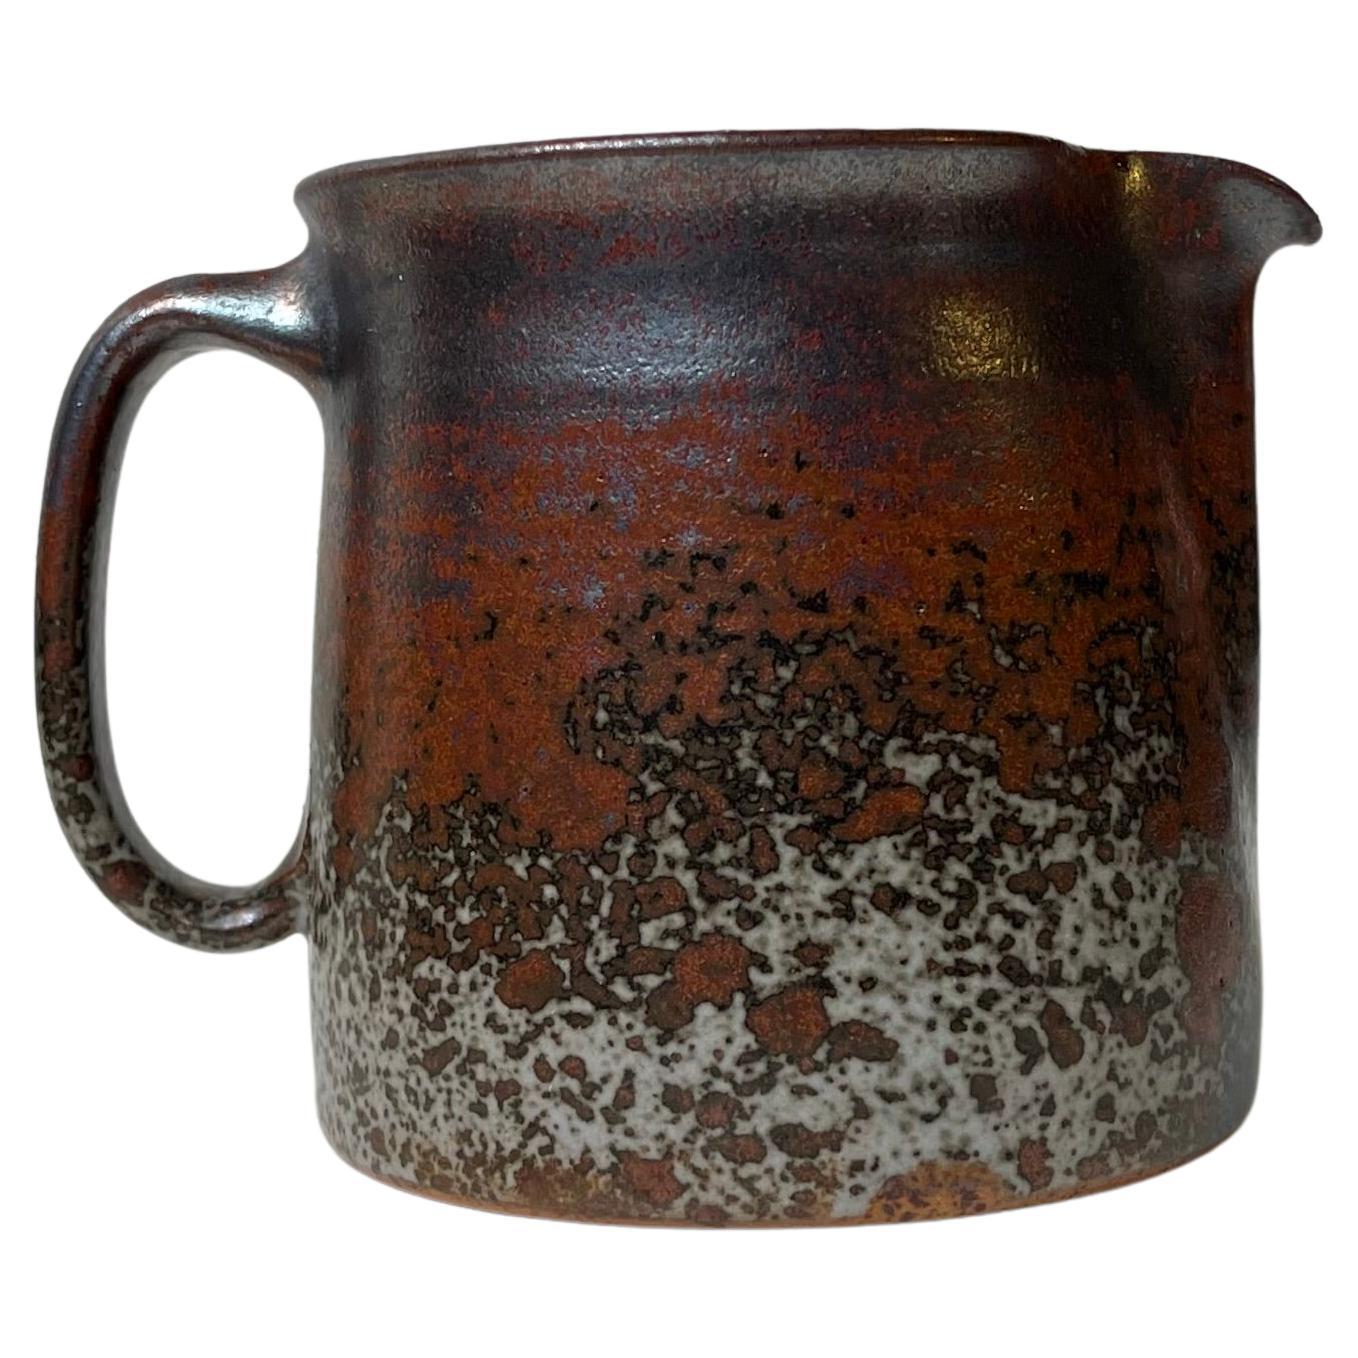 Jacob E. Bang Small Stoneware Jug in Earthy Glazes, 1960s For Sale